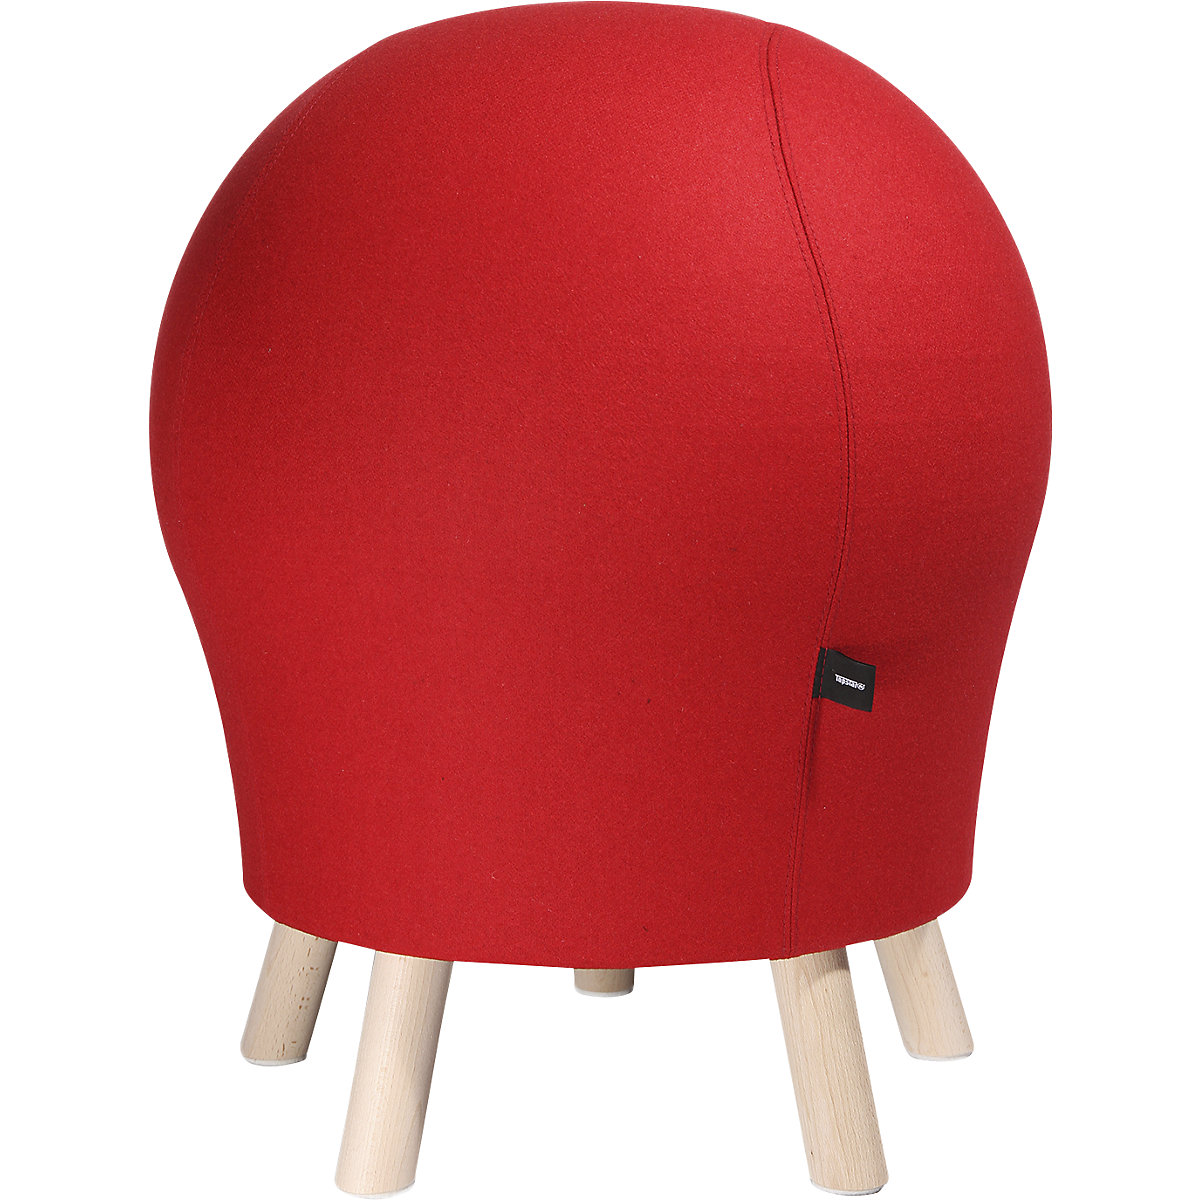 SITNESS 5 ALPINE fitness stool – Topstar, seat height approx. 620 mm, red cover-10